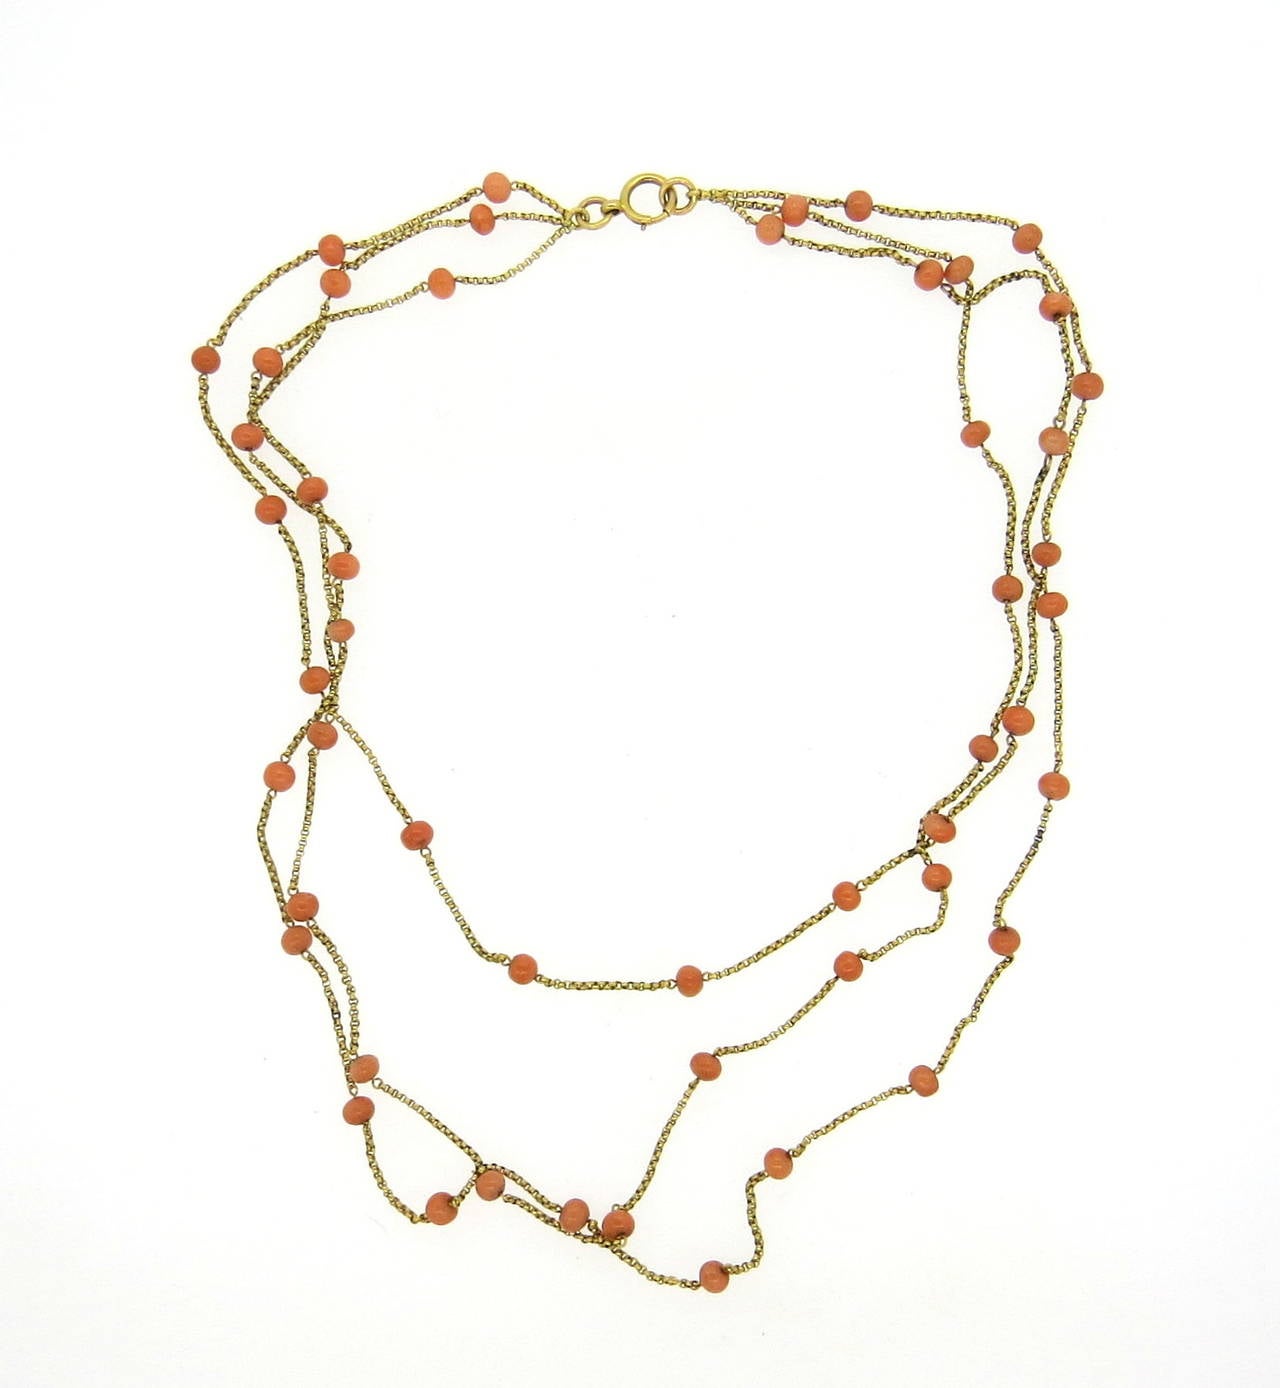 Lovely 14K gold three strand coral bead necklace. Coral beads measure approximately 4.5mm in diameter. Necklace's shortest strand measures 16